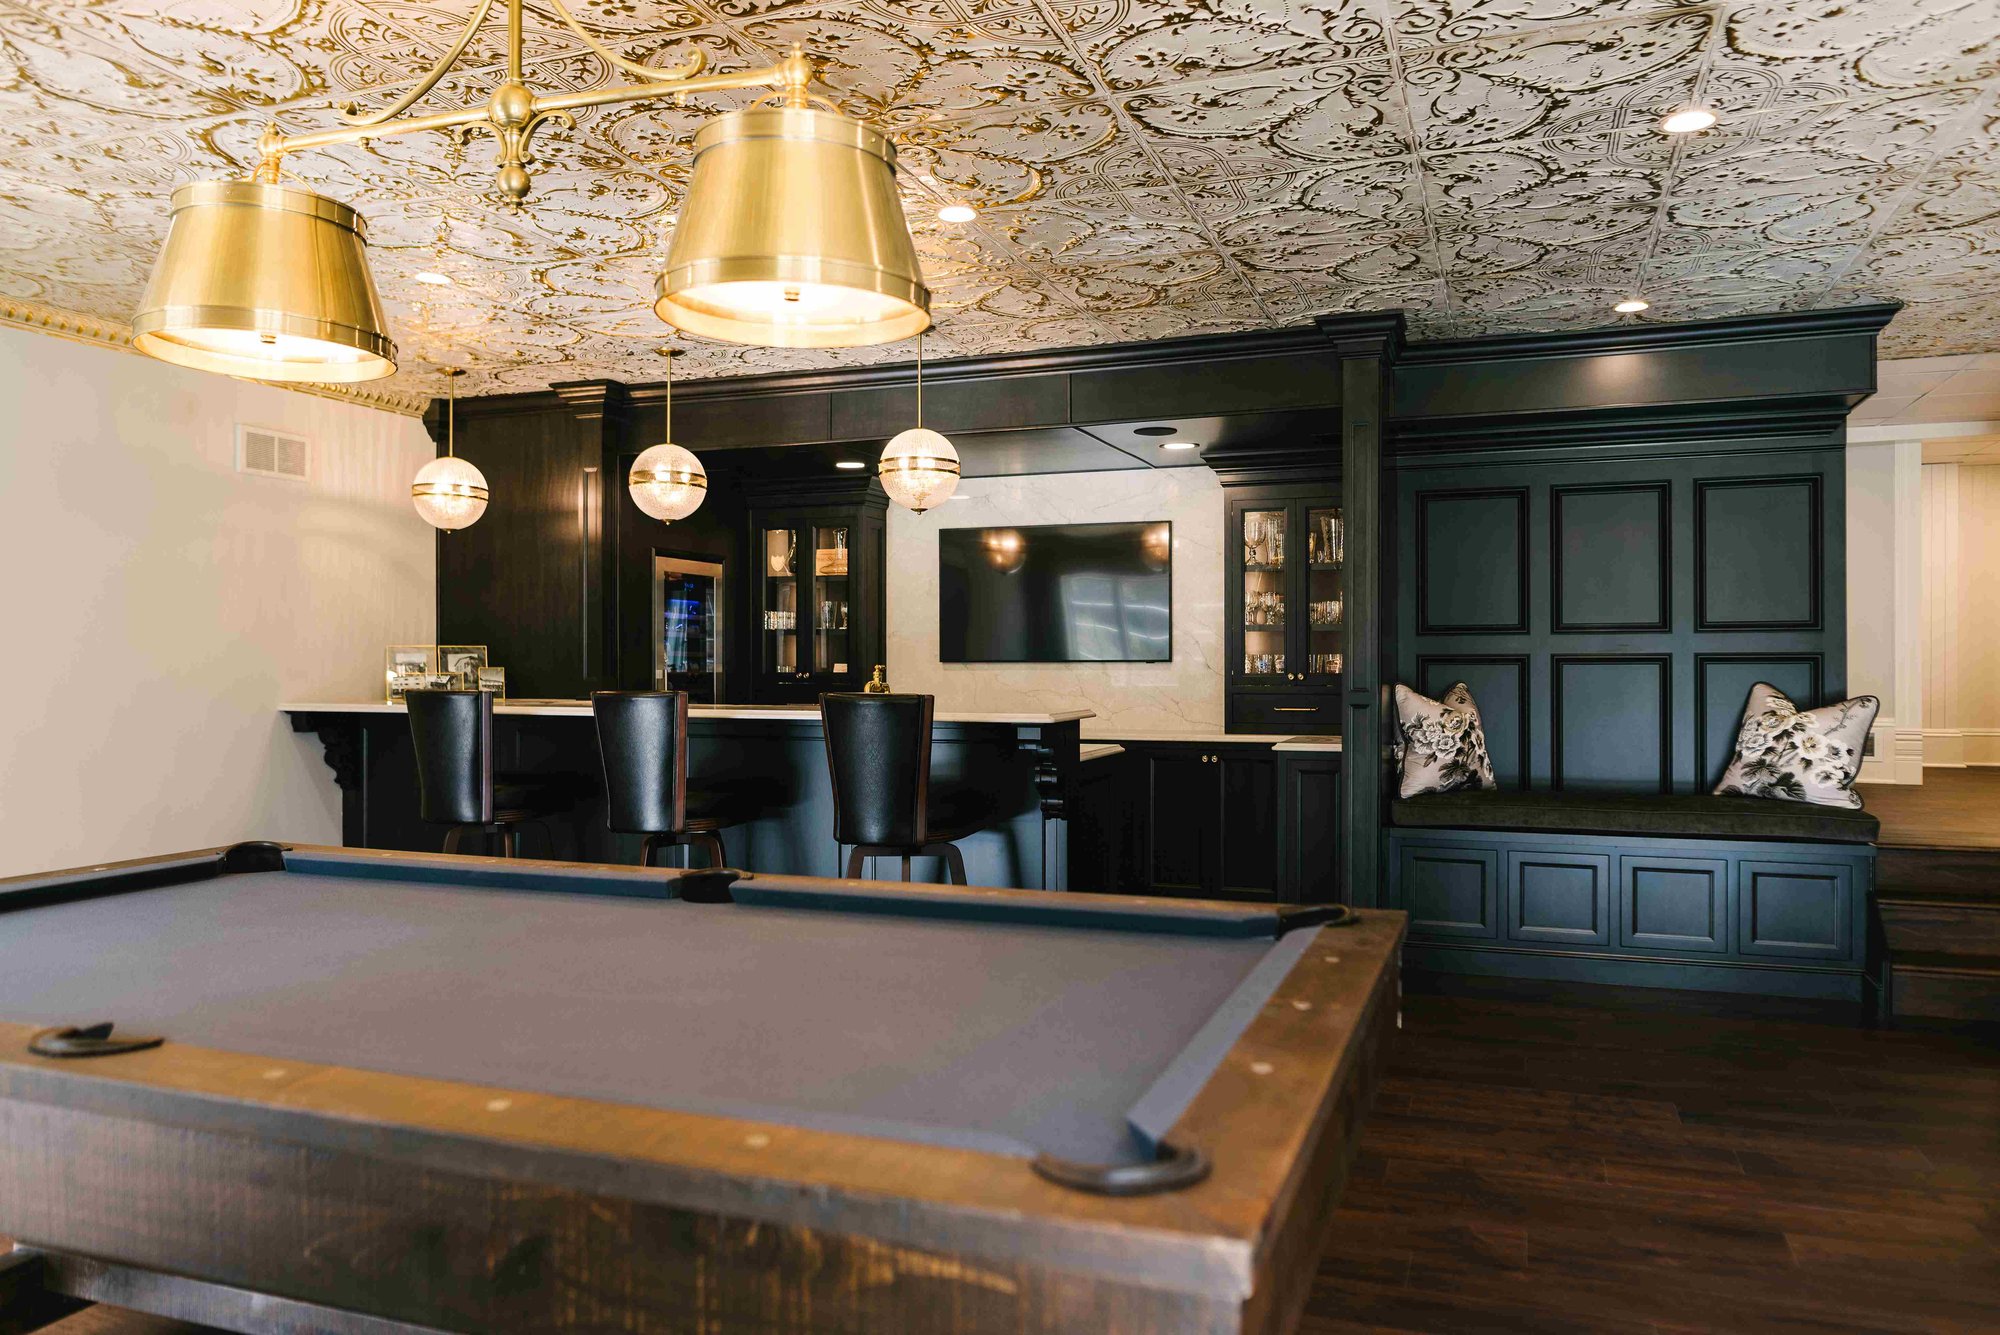 Pool Table and Basement Bar with Statement Ceiling in Northeast Ohio